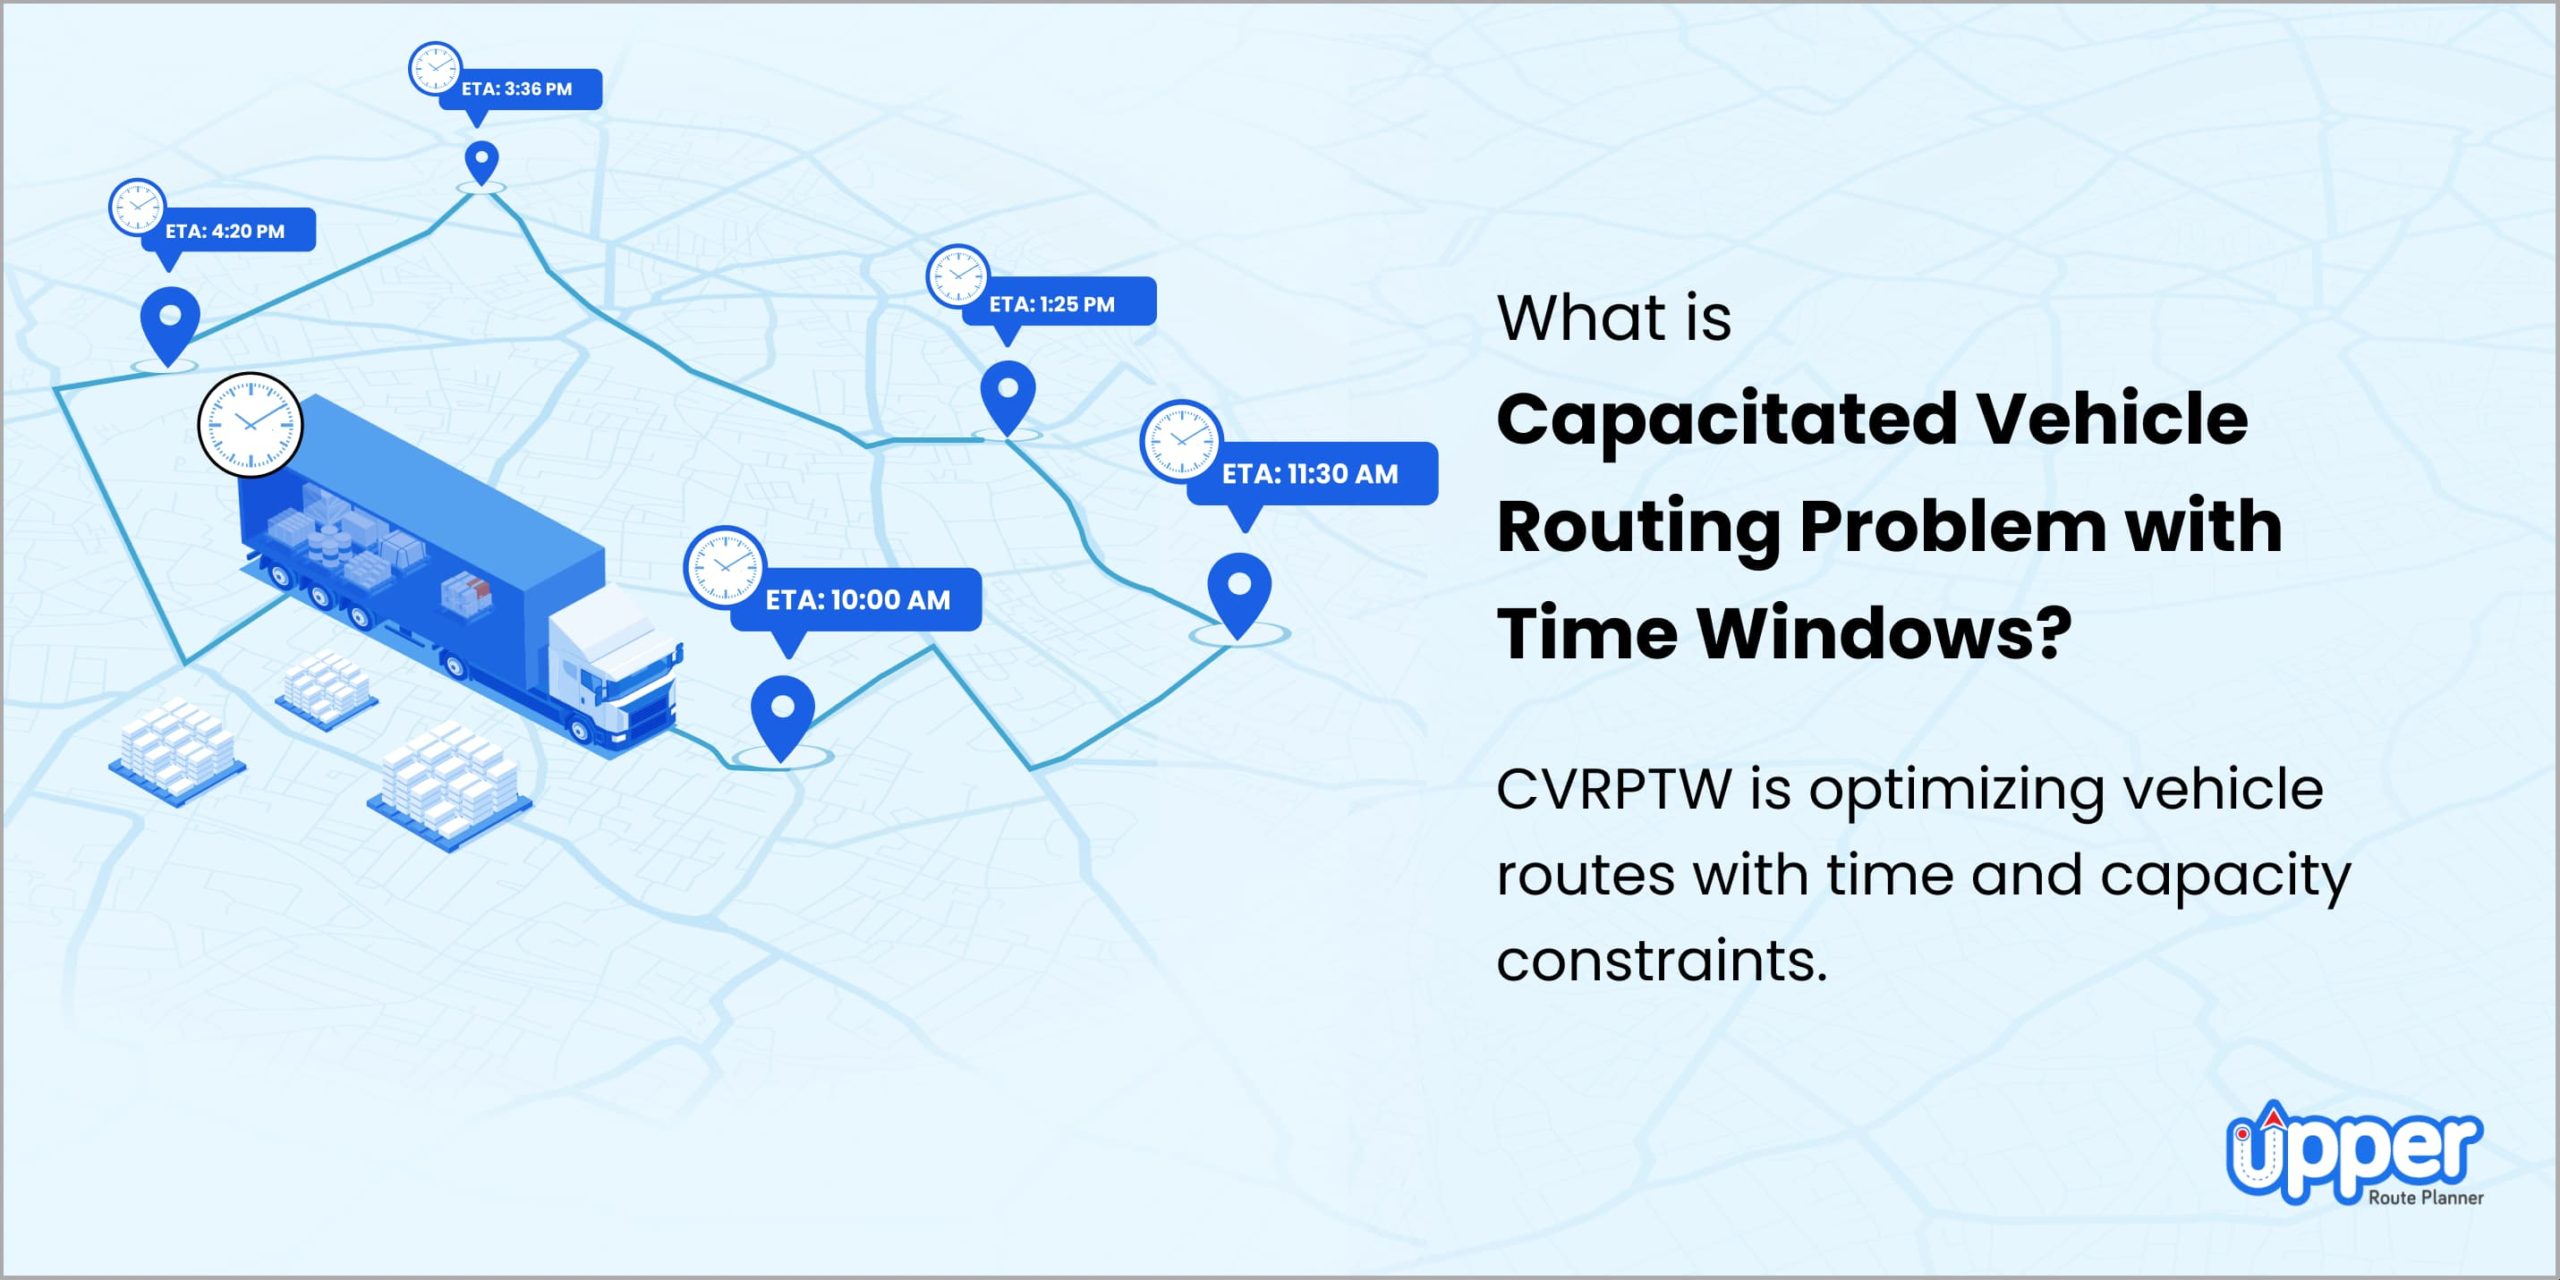 What is capacitated vehicle routing problem with time windows